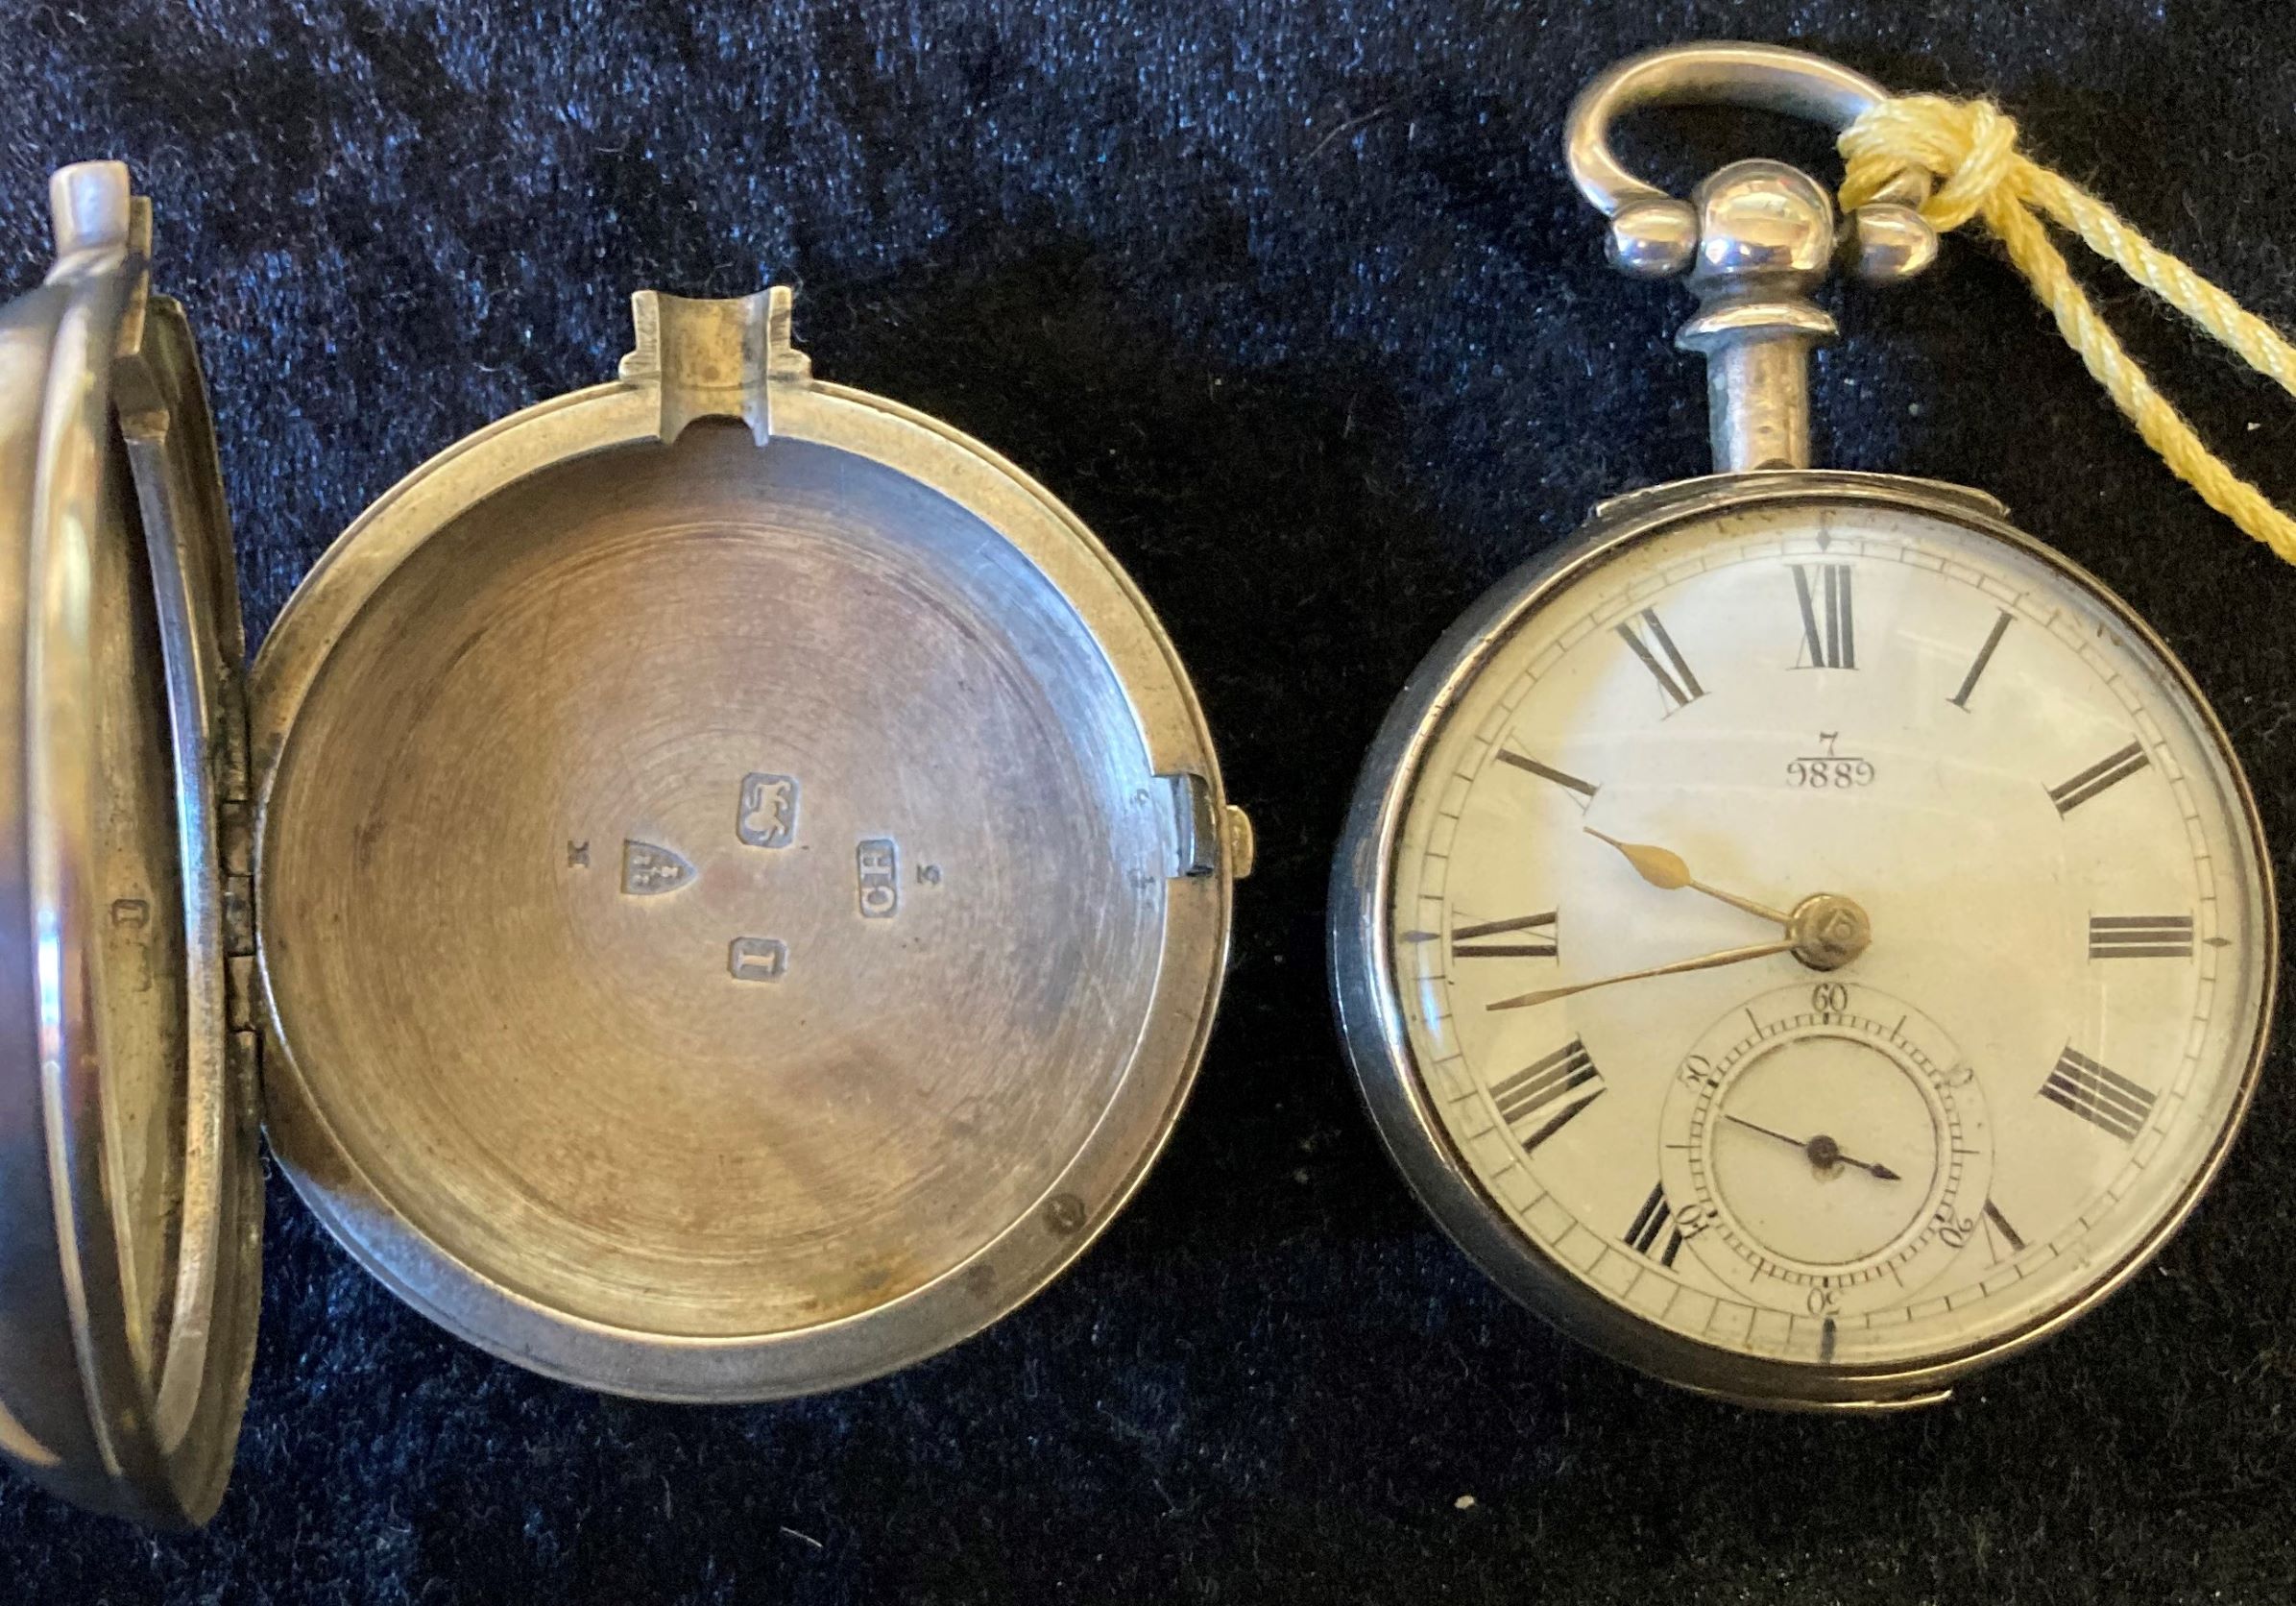 Silver pair case pocket watch (no maker's name) Chester 1892 - Image 3 of 4